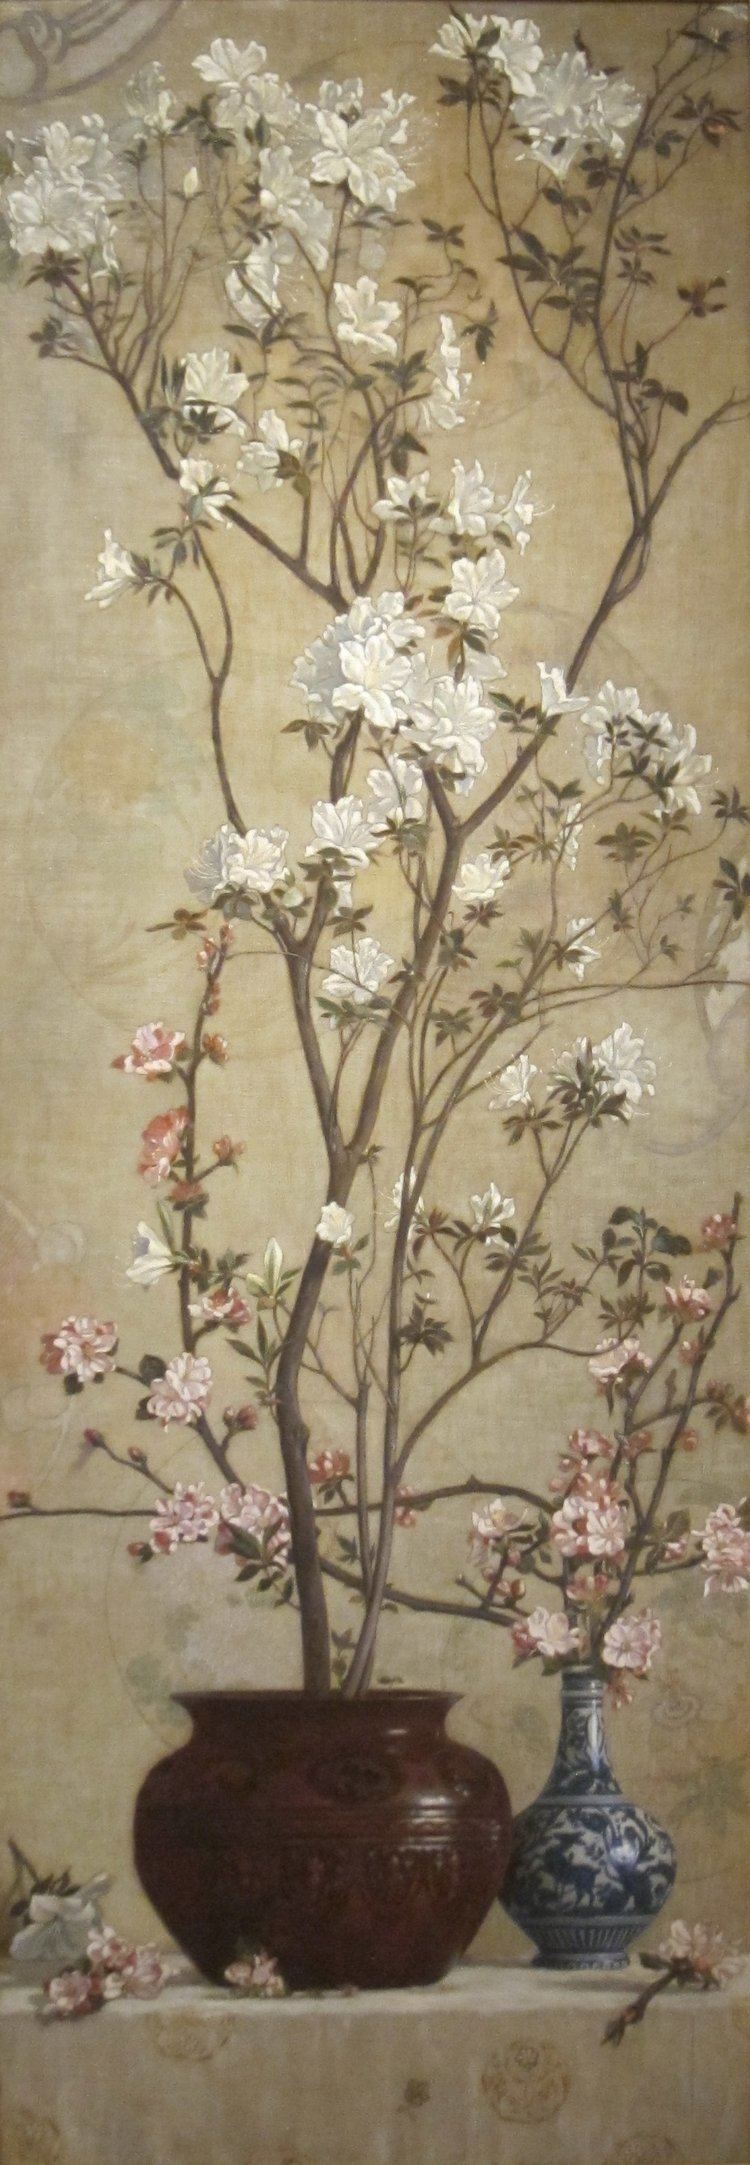 Charles Caryl Coleman FileAzaleas and Apple Blossoms by Charles Caryl ColemanJPG